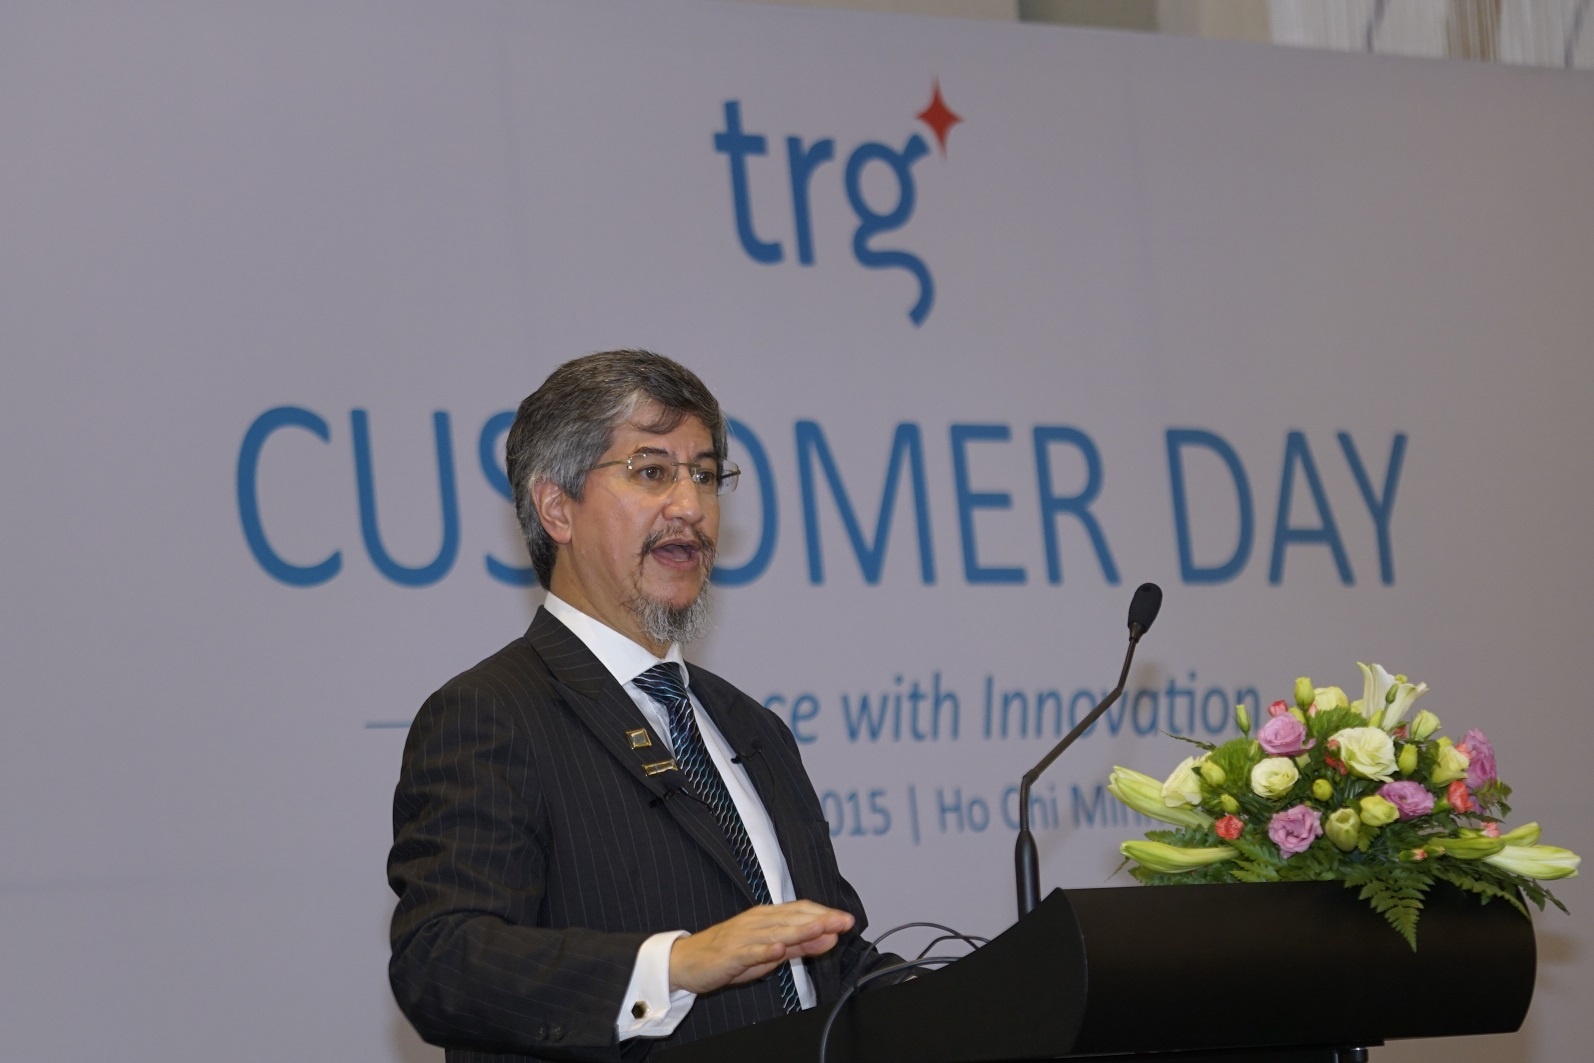 TRG Customer Day 2015 - A Day of Innovation